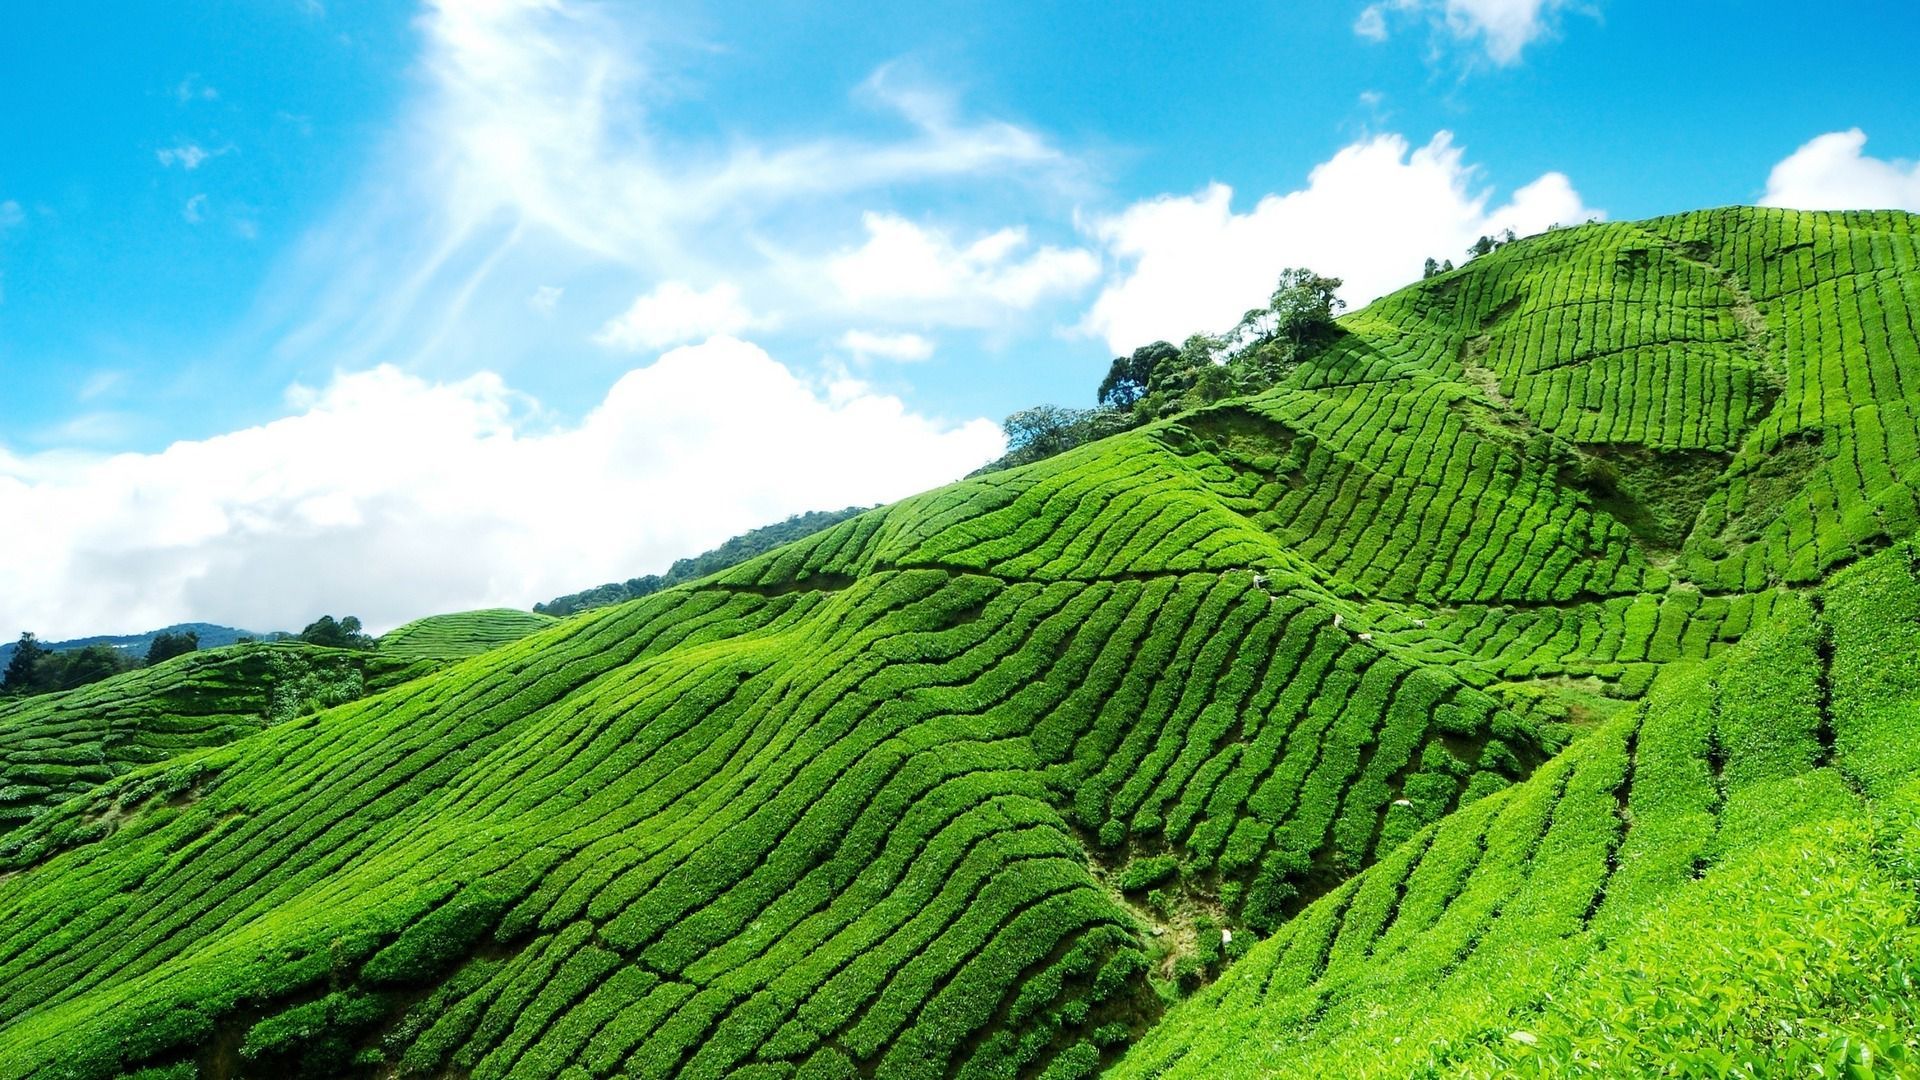 Munnar is an attractive destination with the world's best and renowned tea estates. It is one of the biggest centers of. Munnar, Tour packages, Nature wallpaper